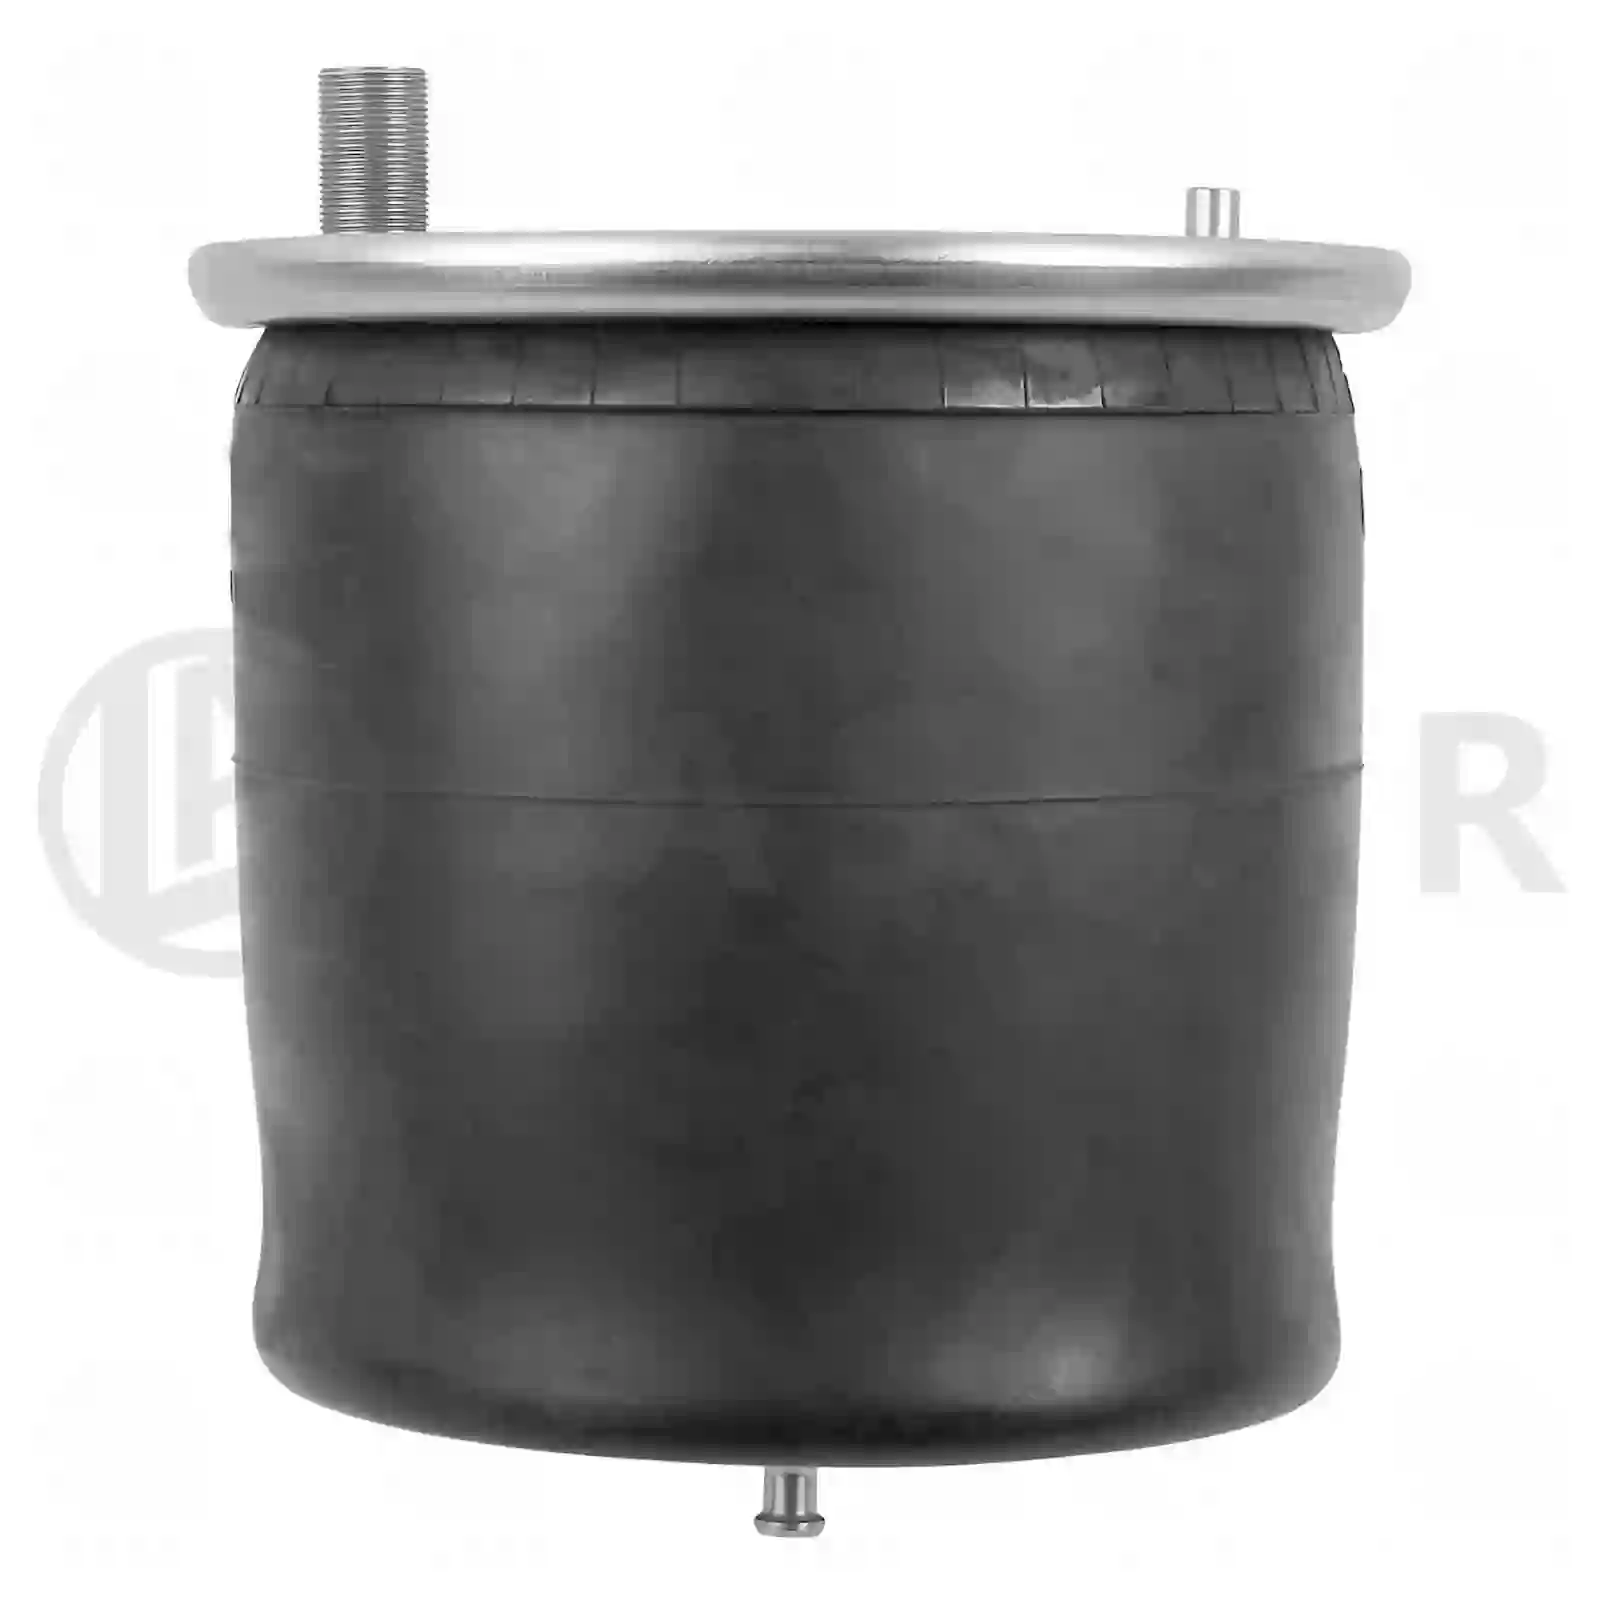 Air spring, with steel piston, 77728925, 5010557622, 7421978484, 20735220, 21878484, 21978490, ZG40794-0008 ||  77728925 Lastar Spare Part | Truck Spare Parts, Auotomotive Spare Parts Air spring, with steel piston, 77728925, 5010557622, 7421978484, 20735220, 21878484, 21978490, ZG40794-0008 ||  77728925 Lastar Spare Part | Truck Spare Parts, Auotomotive Spare Parts